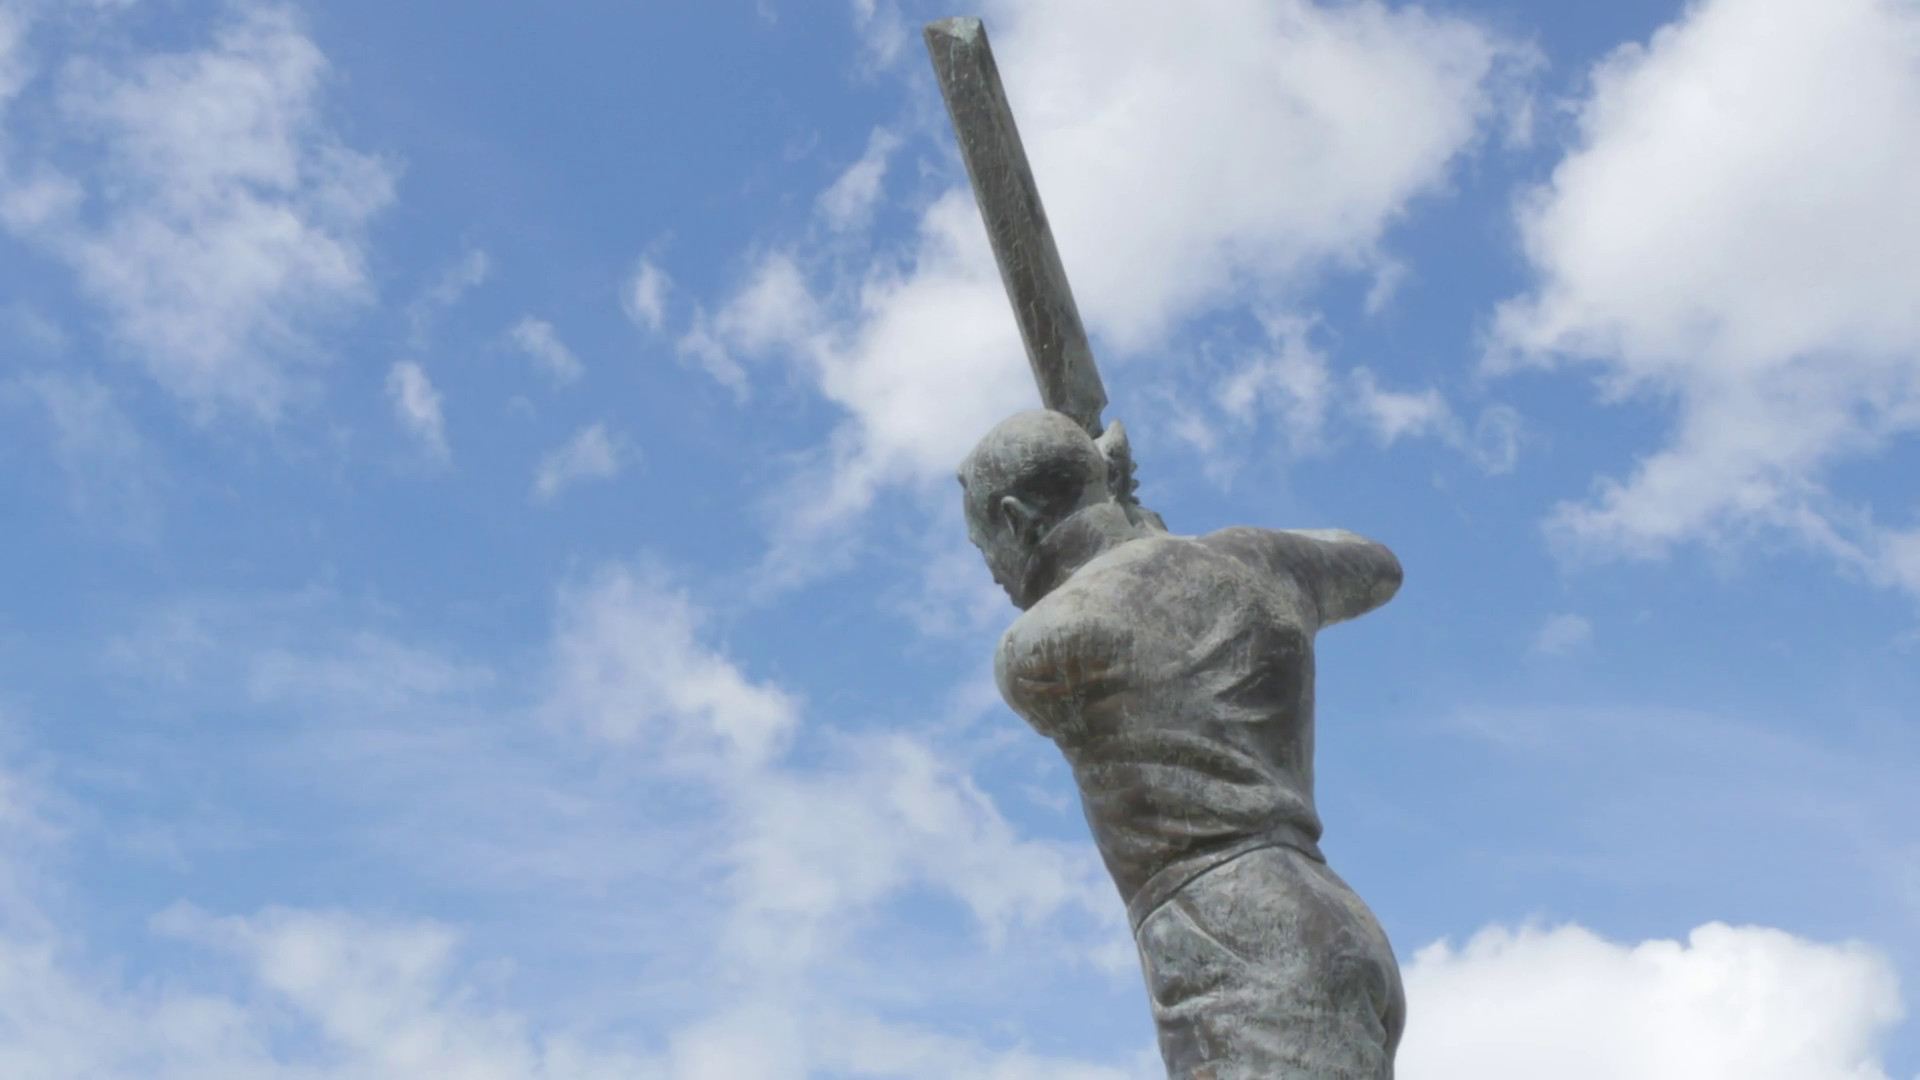 1920x1080 Statue of Garfield Sobers at the Kensington Oval Cricket Ground, St Michael,  Barbados, West Indies, Caribbean Stock Video Footage - VideoBlocks